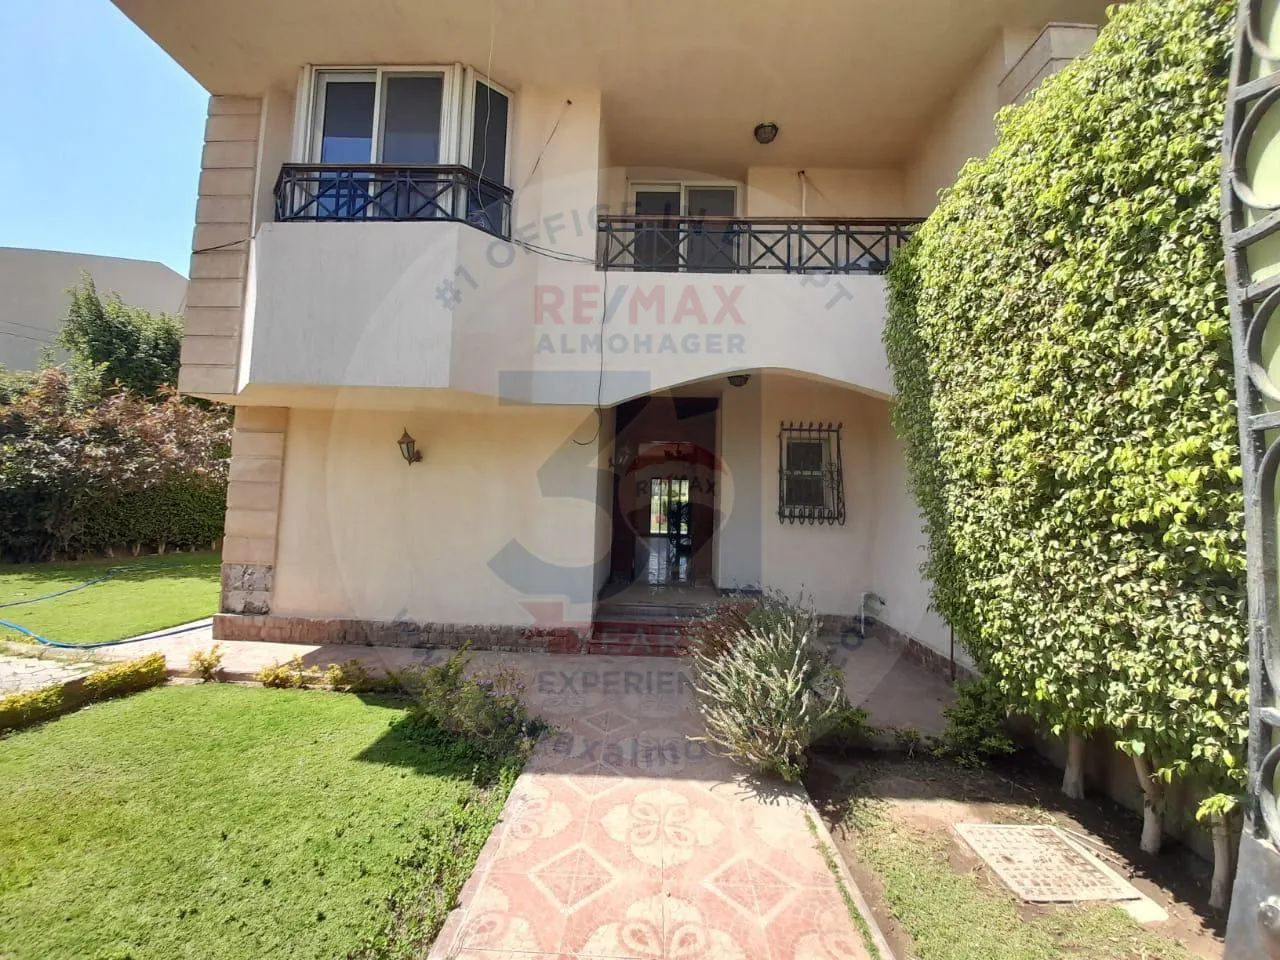 For sale Twin House in Rabwah Sheikh Zayed in a prime location - land area 542 meters